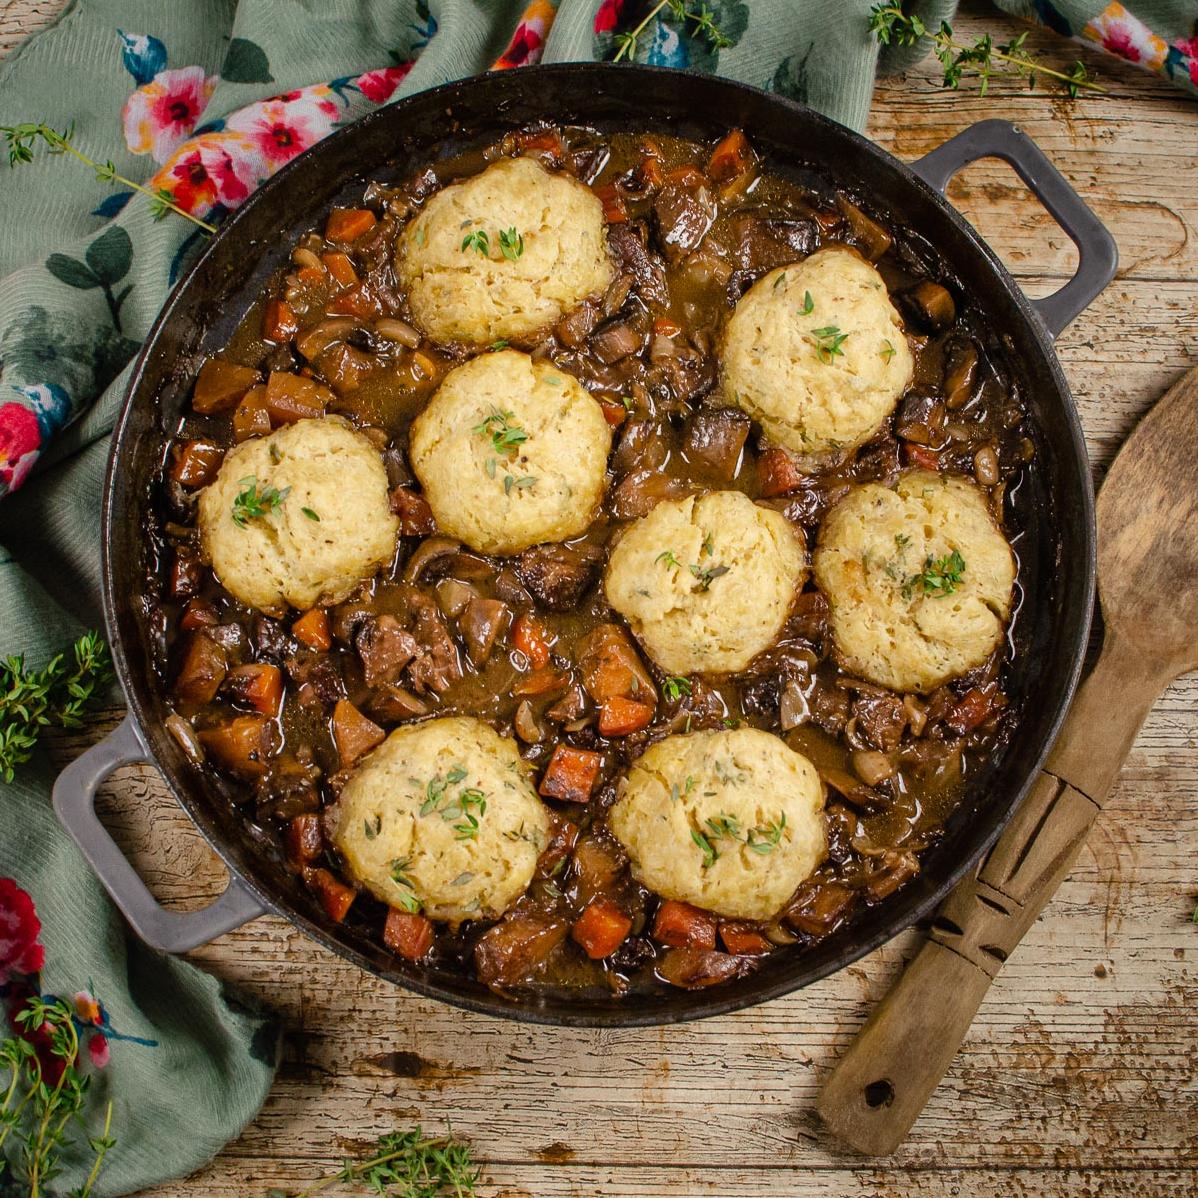  Perfect for a cozy night in, this stew is comfort food at its best.